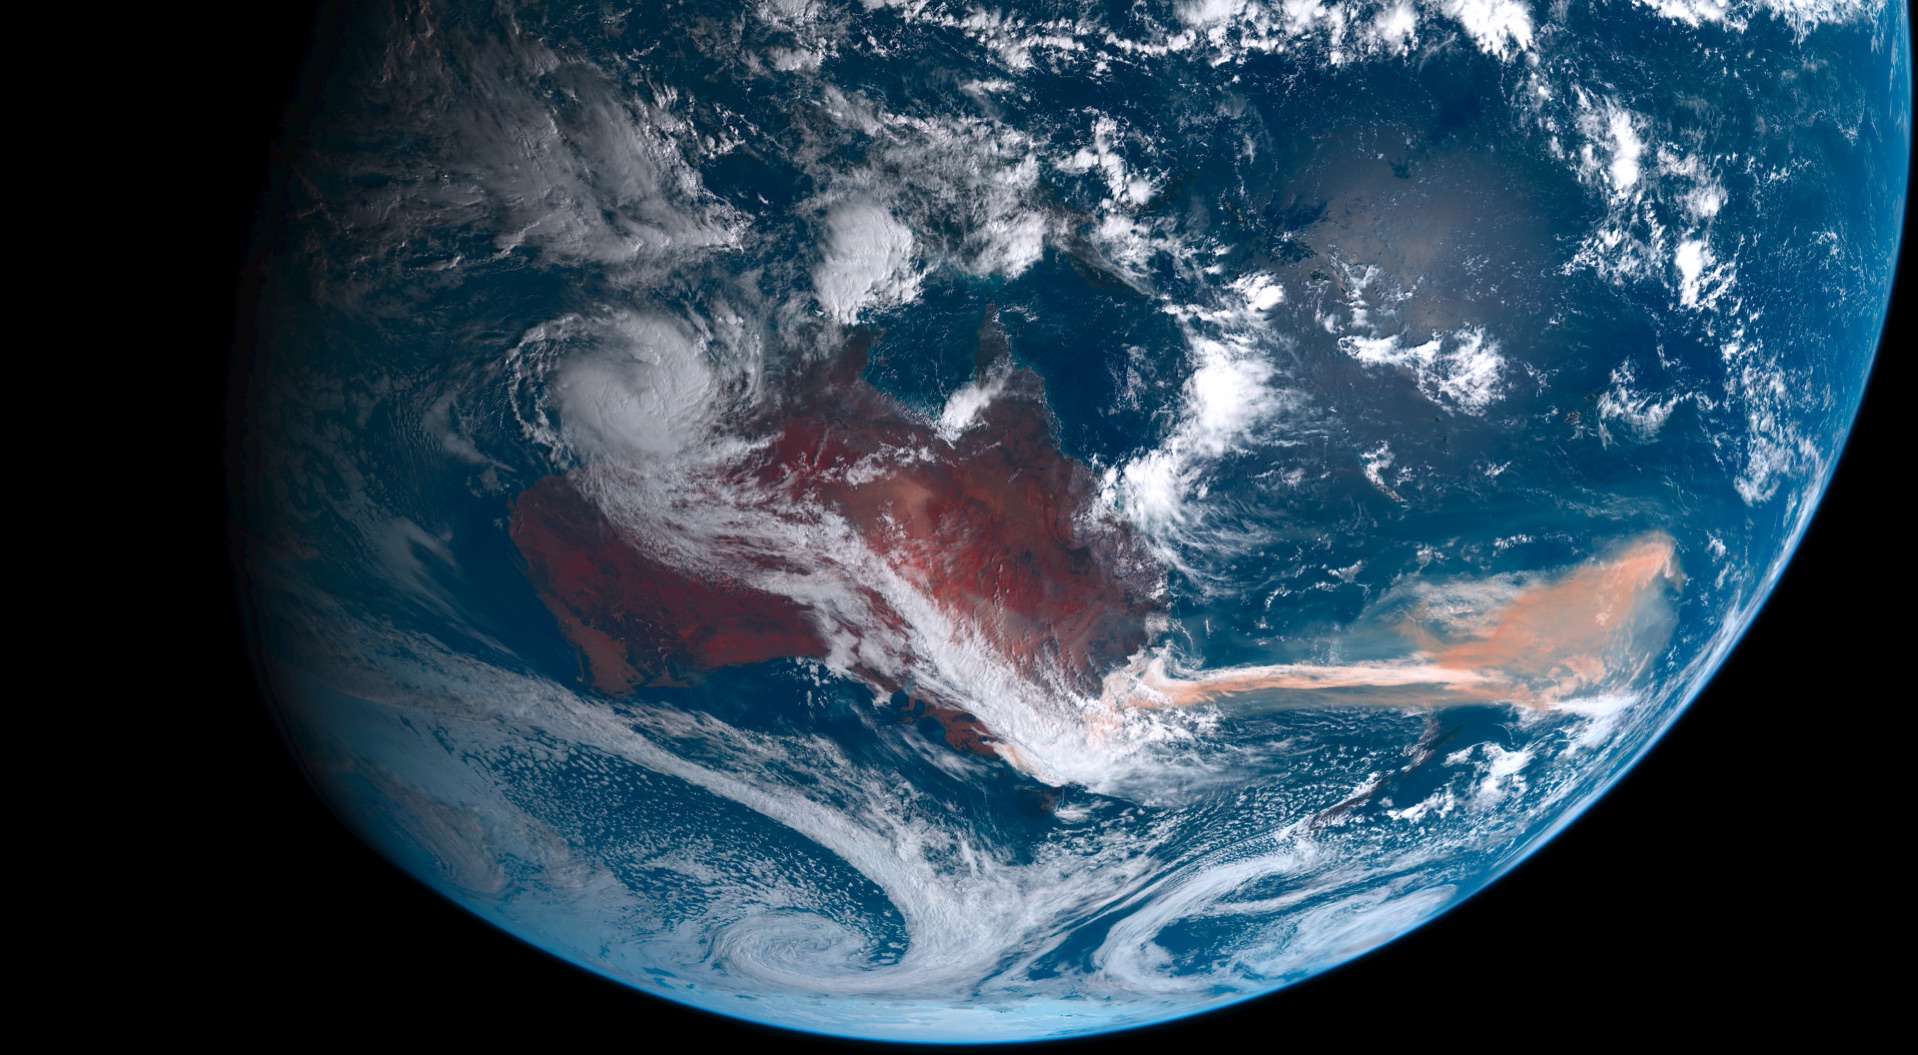 Himawari-8 satellite image showing the January 2020 aerosol plume stretching over the South Pacific.